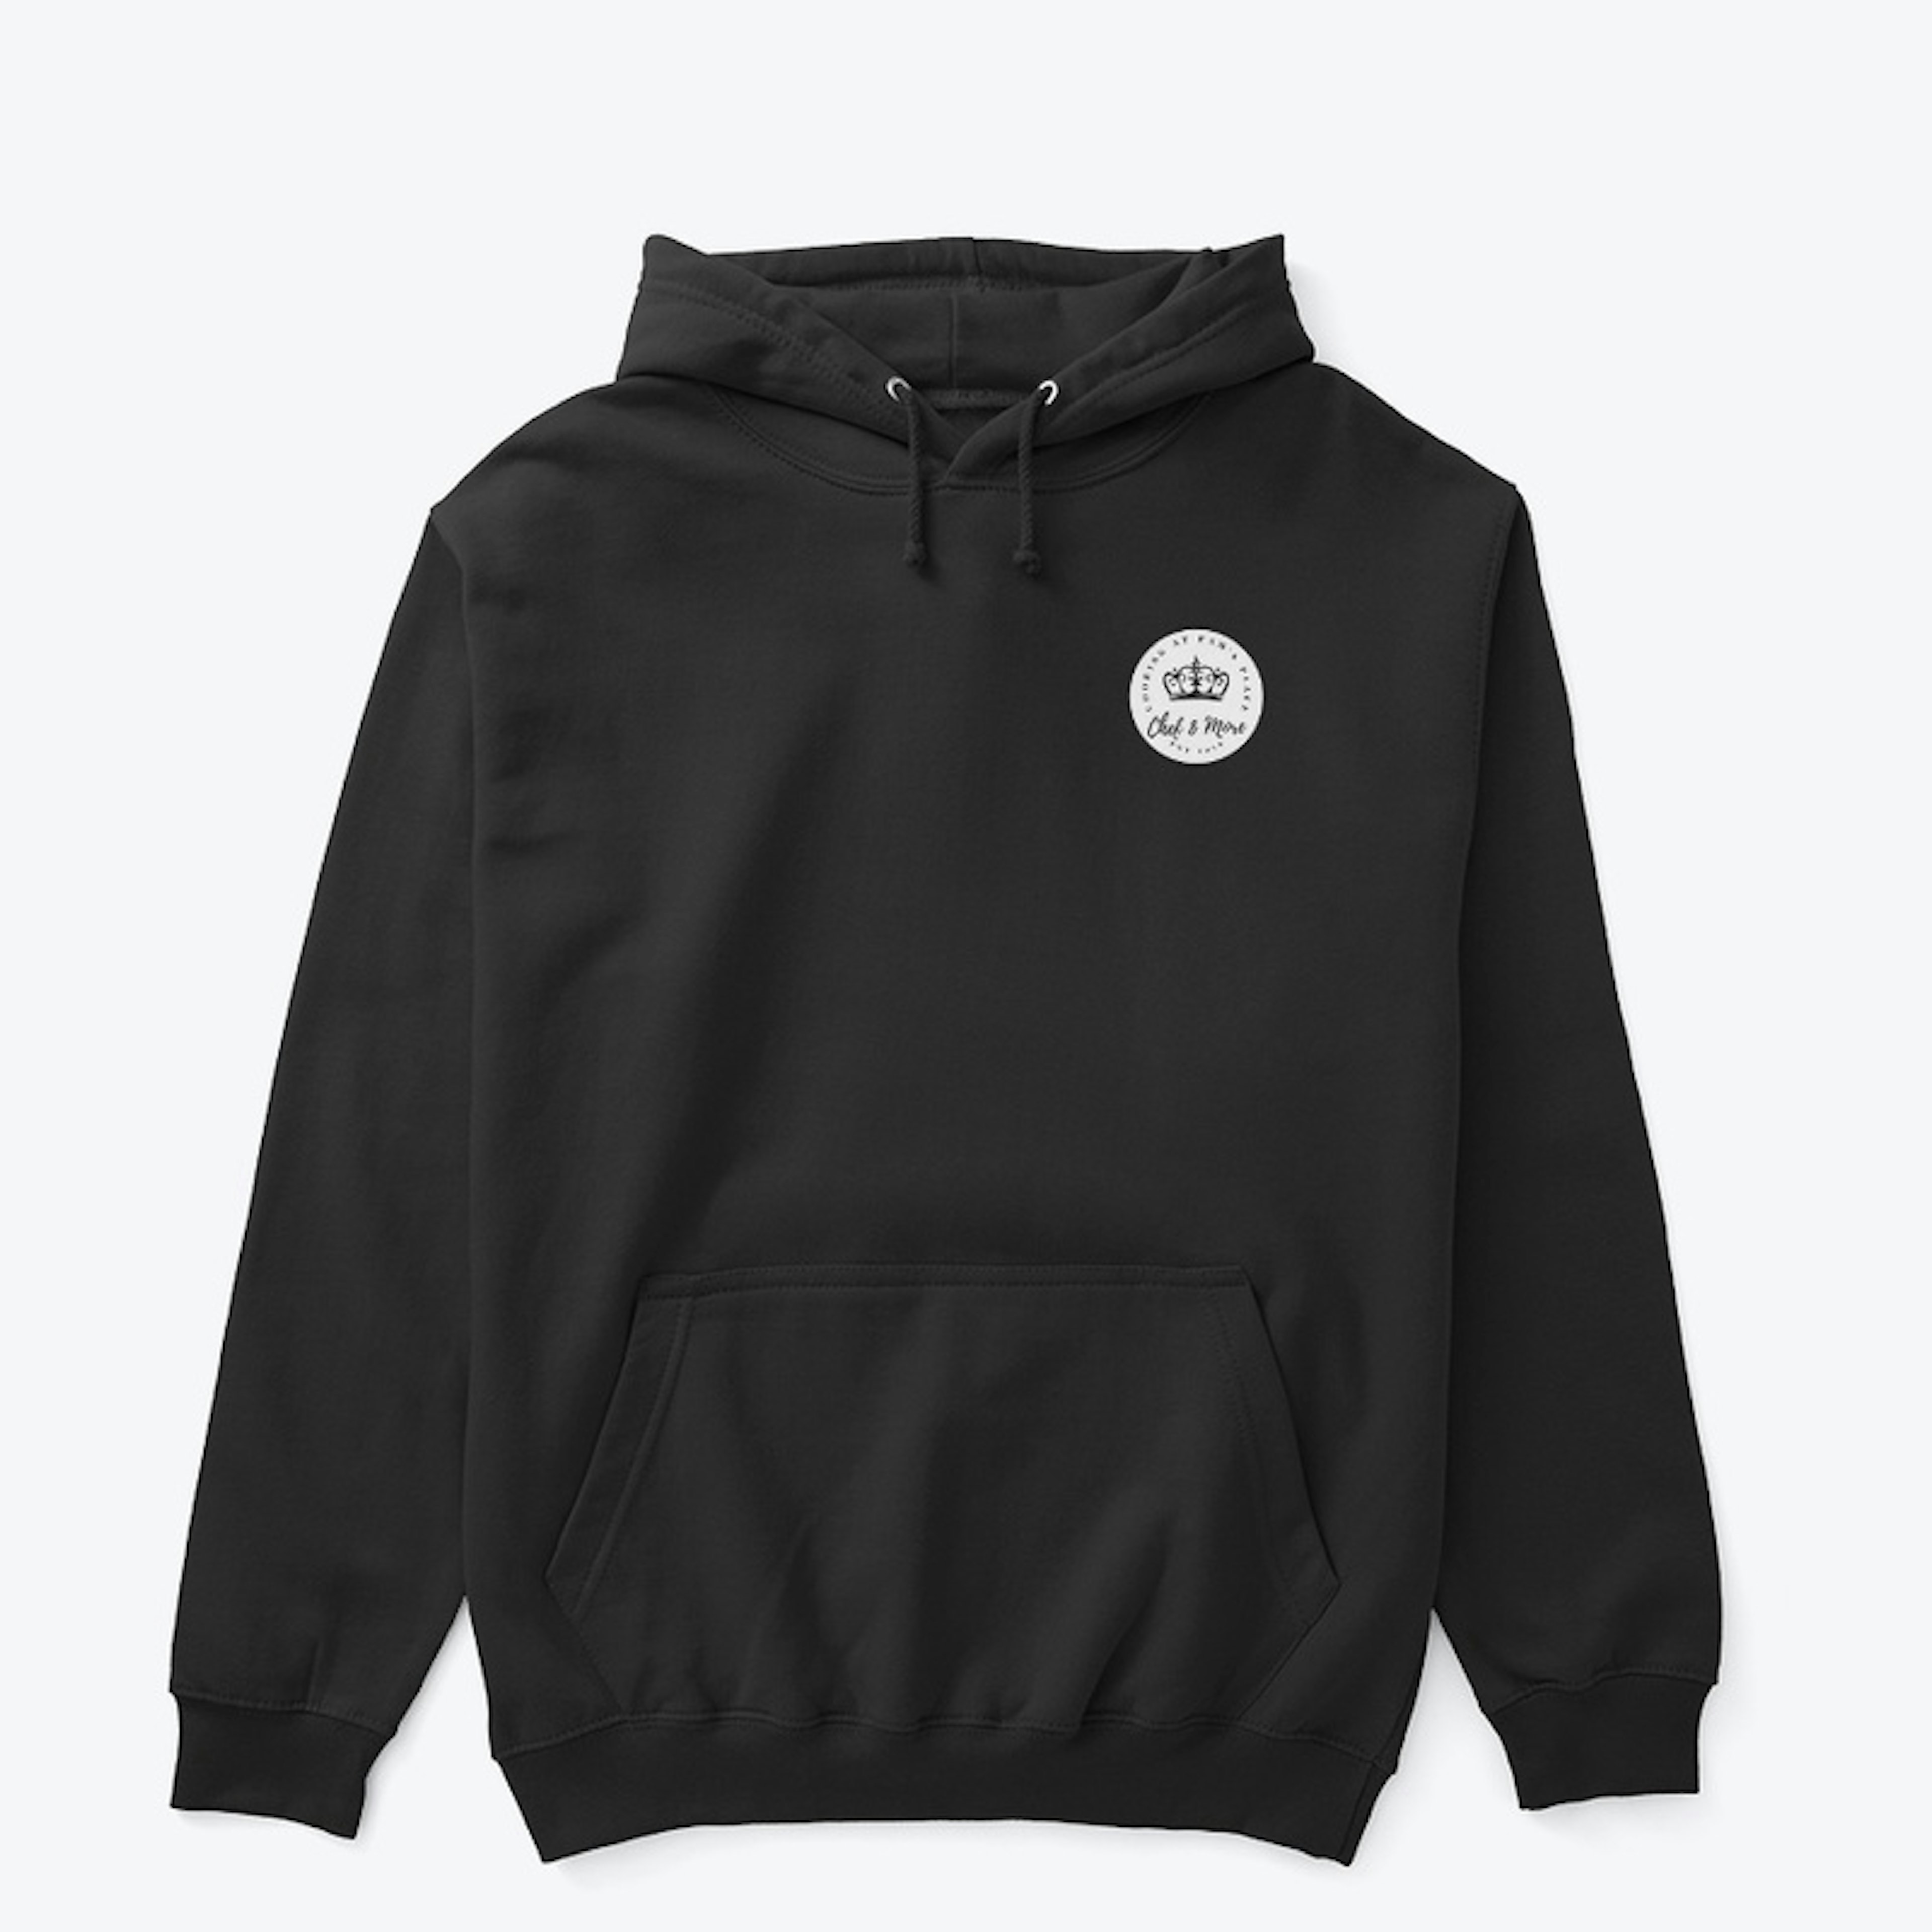 Come With Me - Original Hoodie Unisex